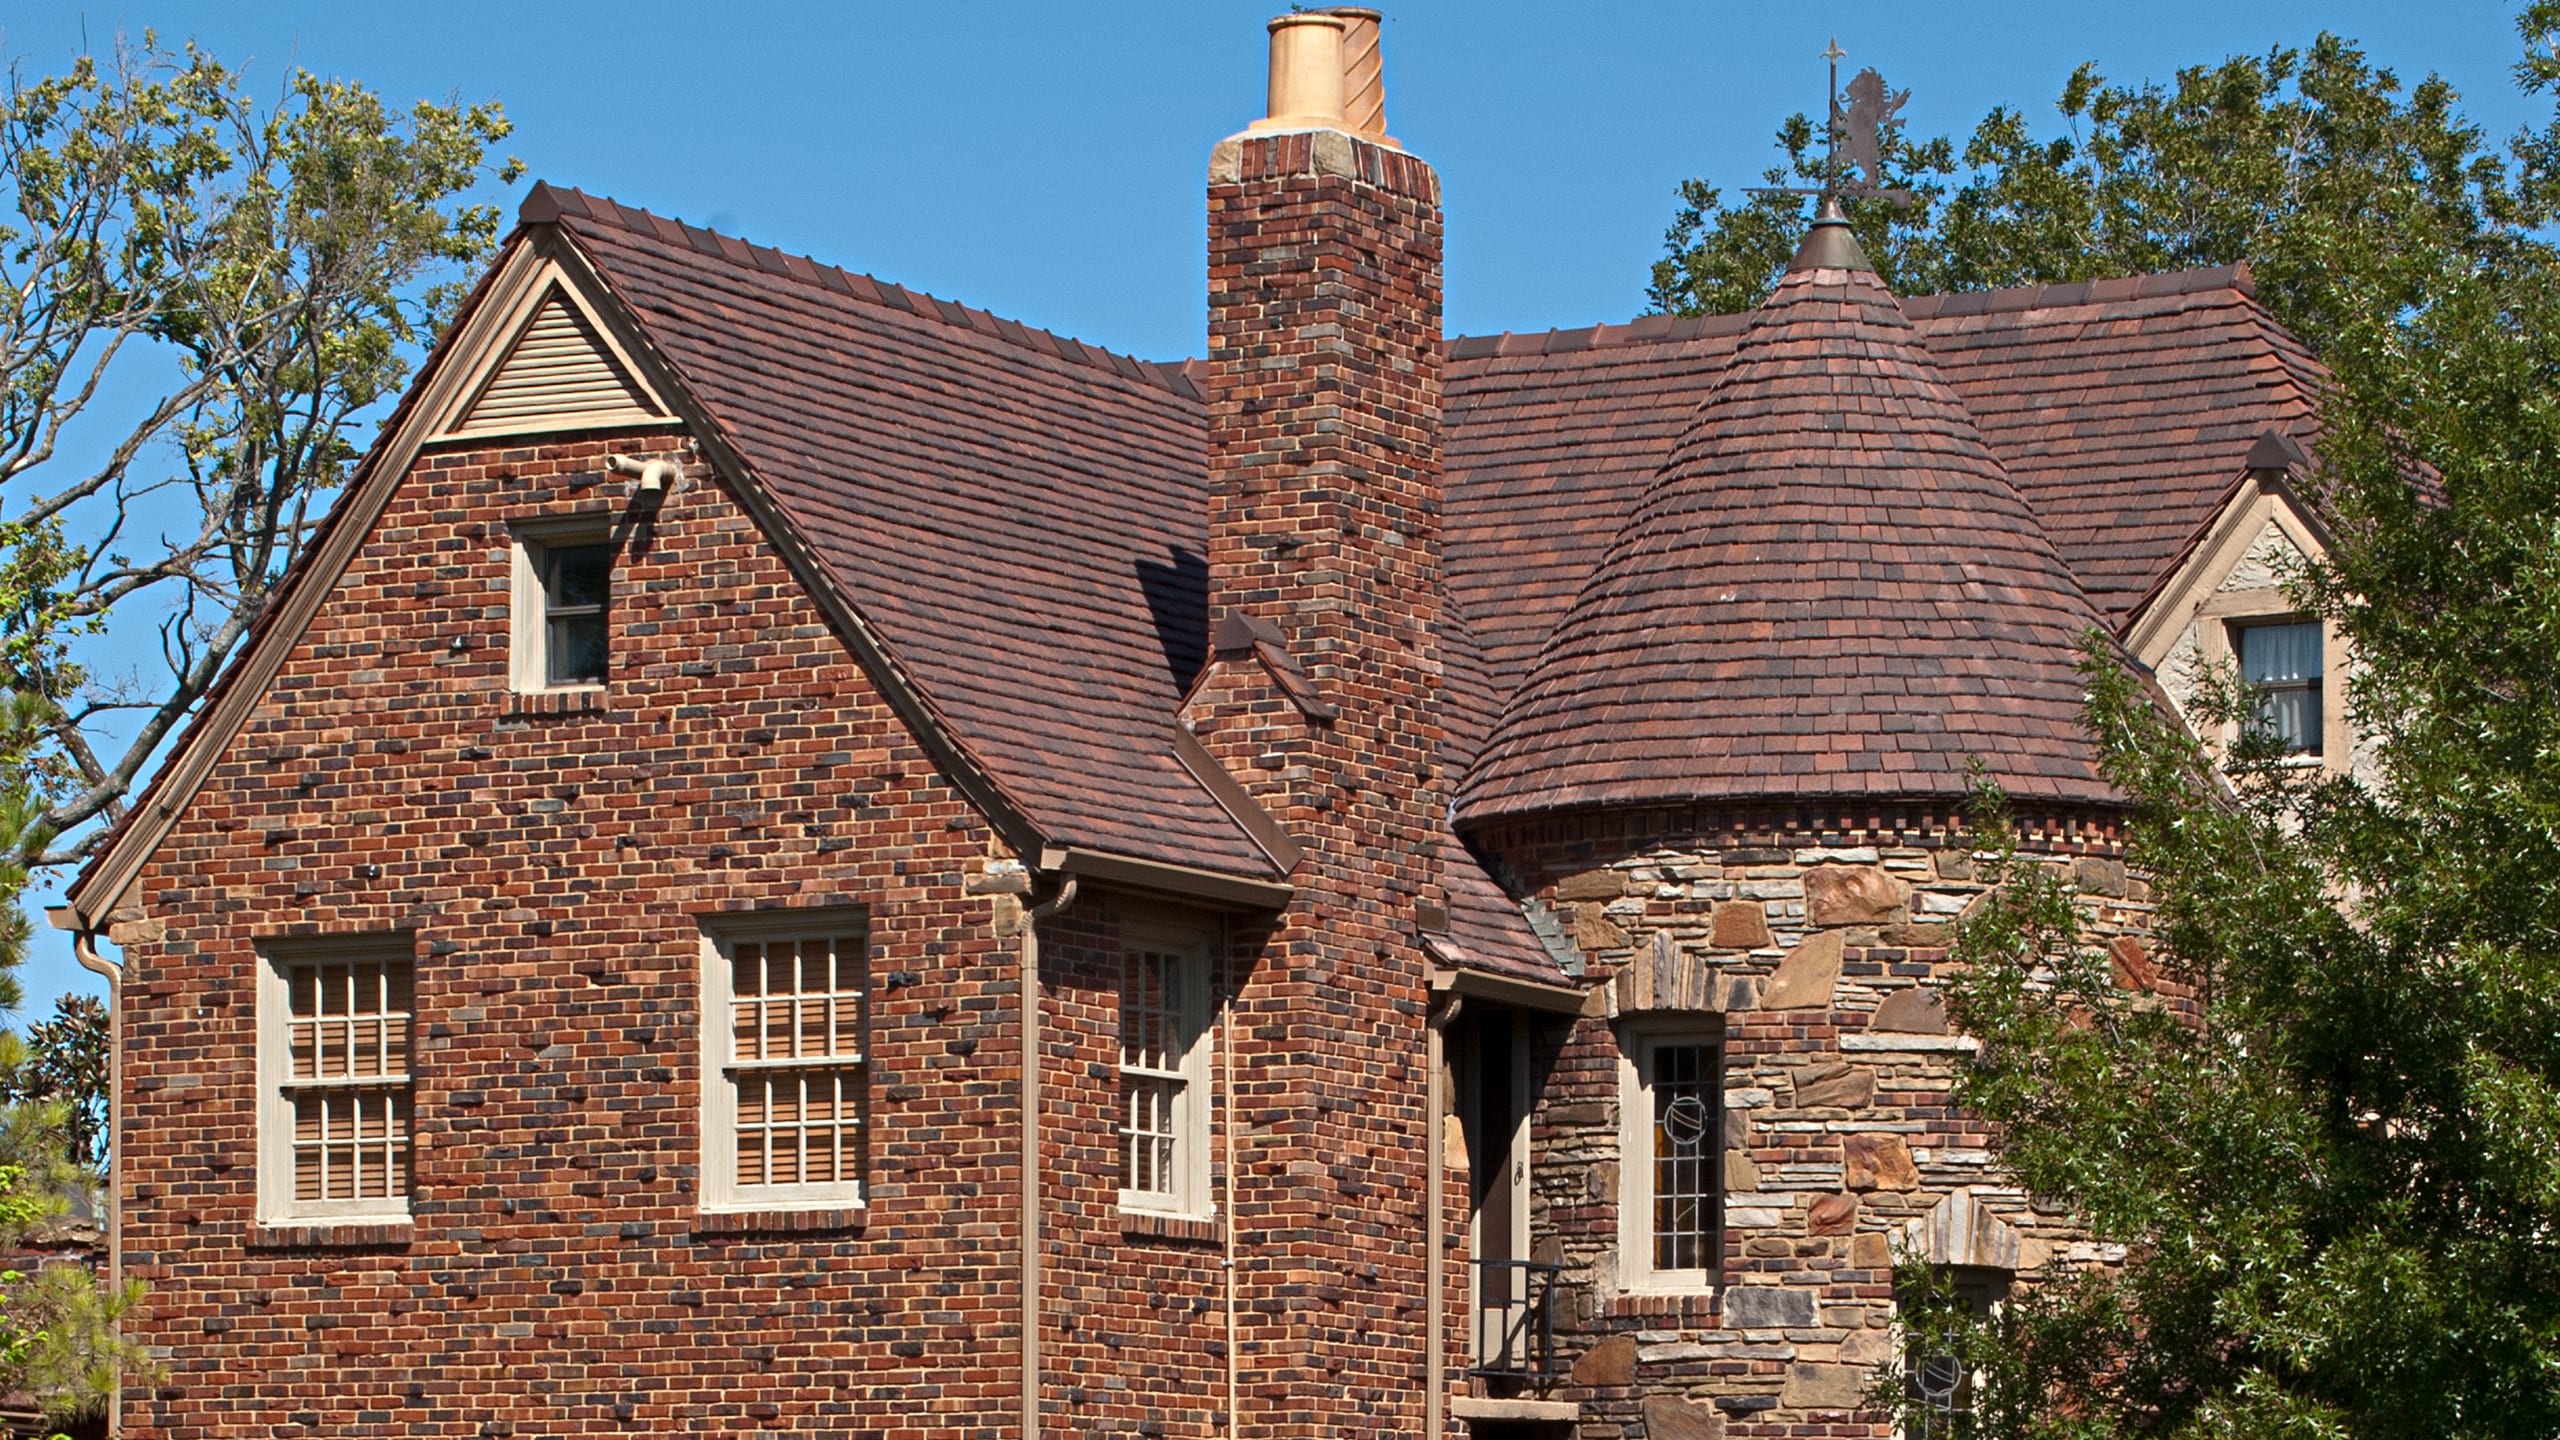 Private Residence - Oklahoma Ludowici Roof Tile